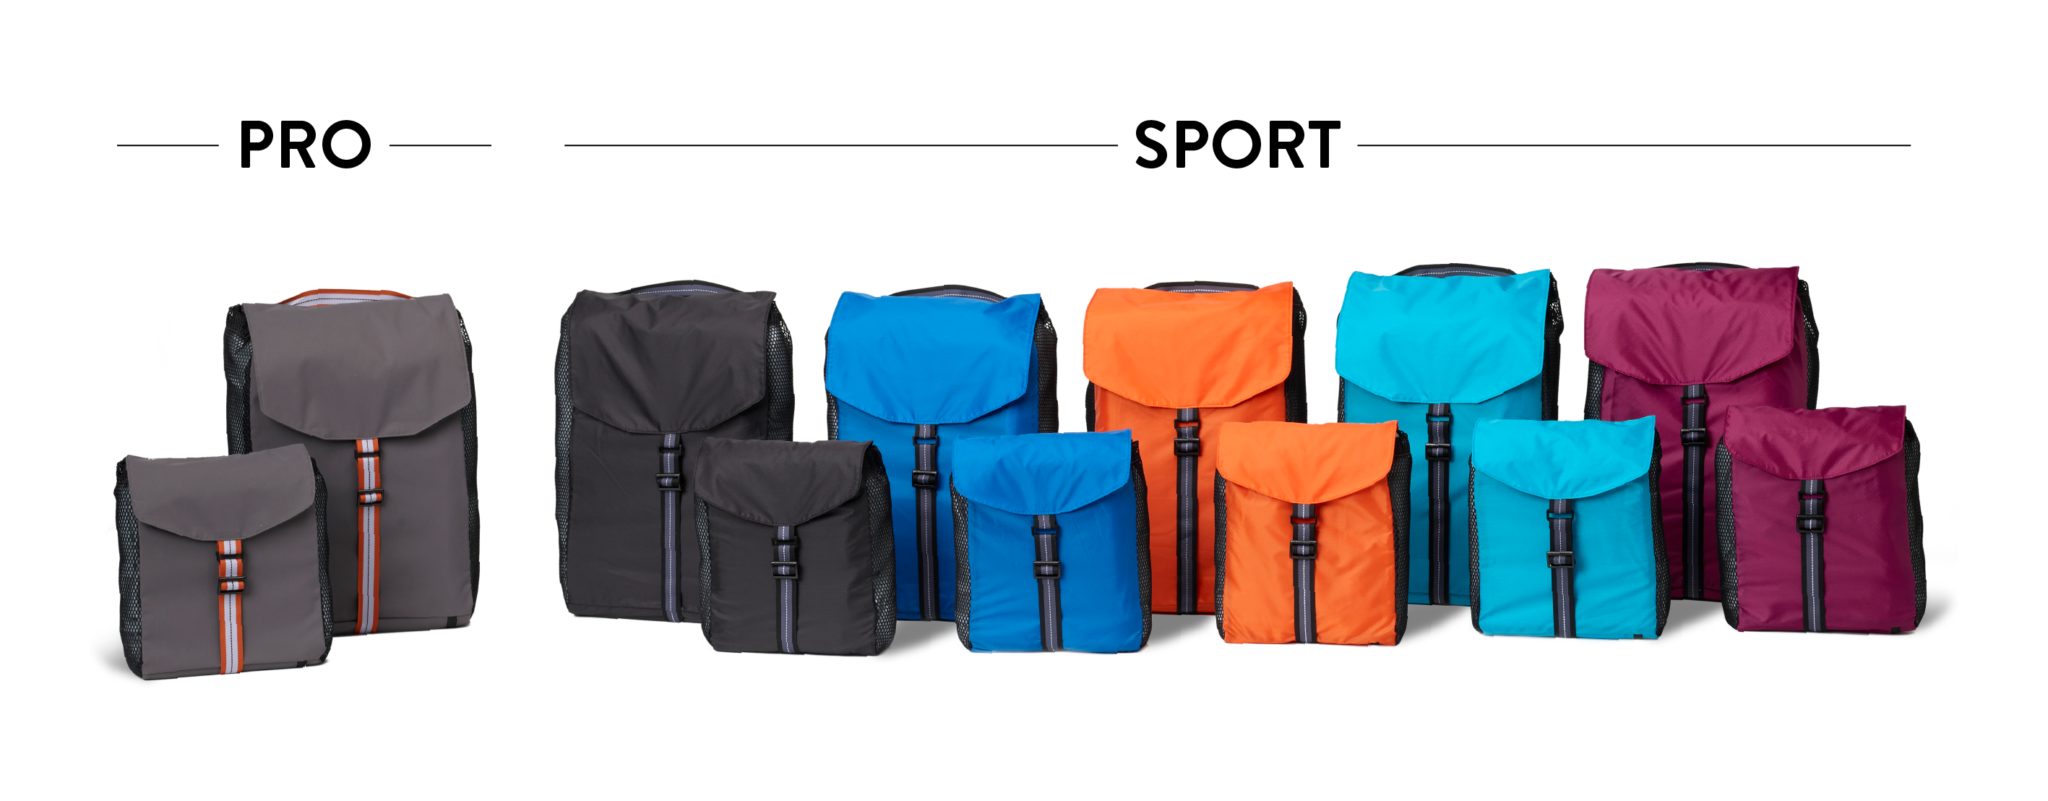 a group of backpacks in different colors